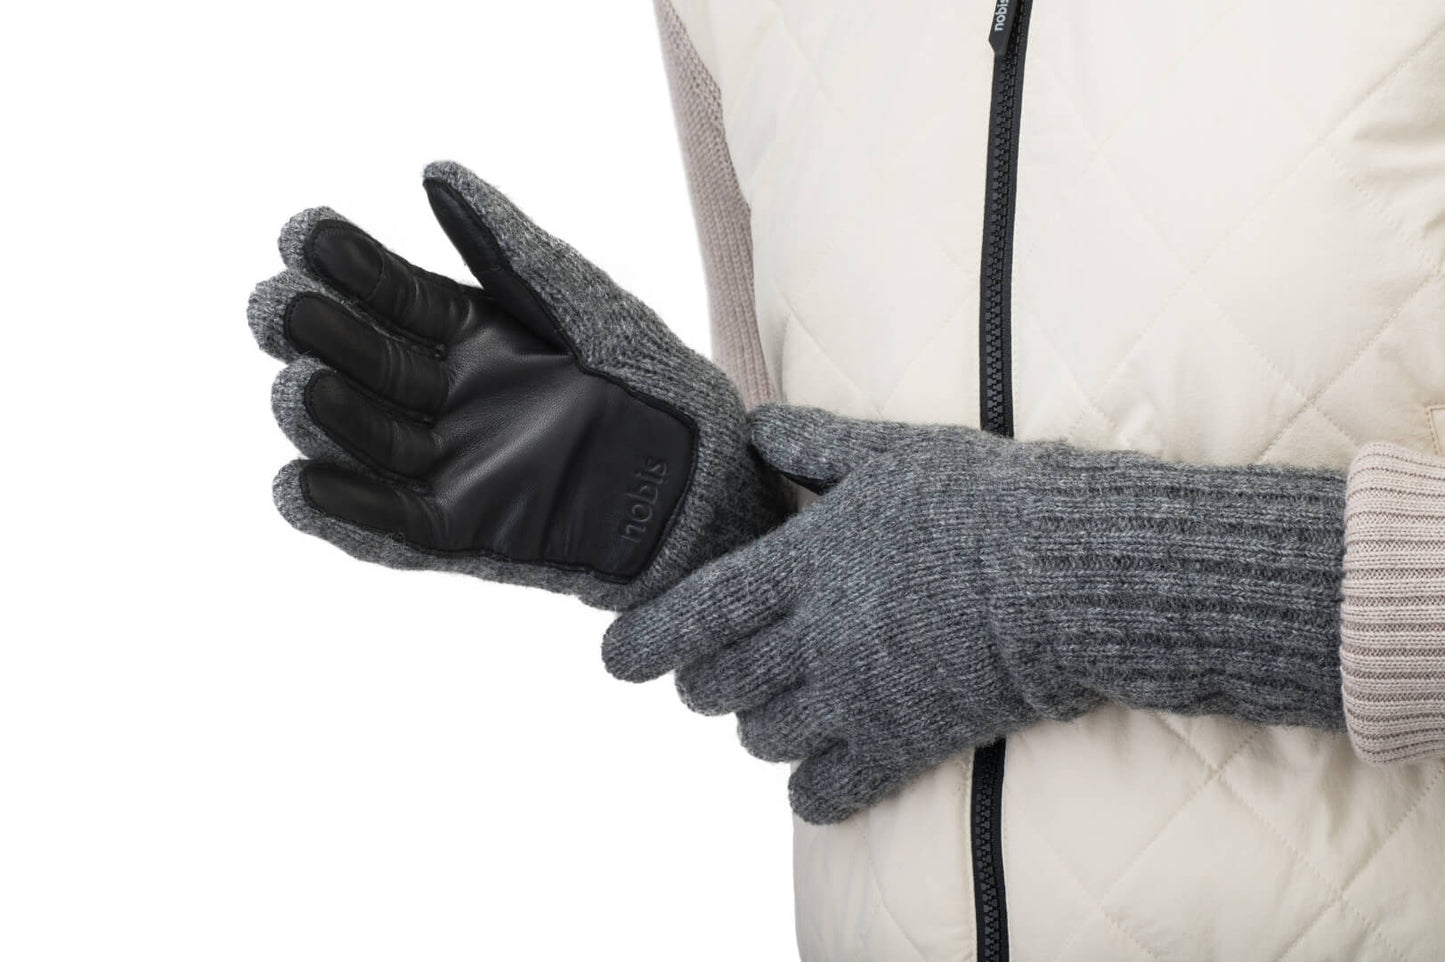 Aria Unisex Knit/Leather Gloves in Concrete